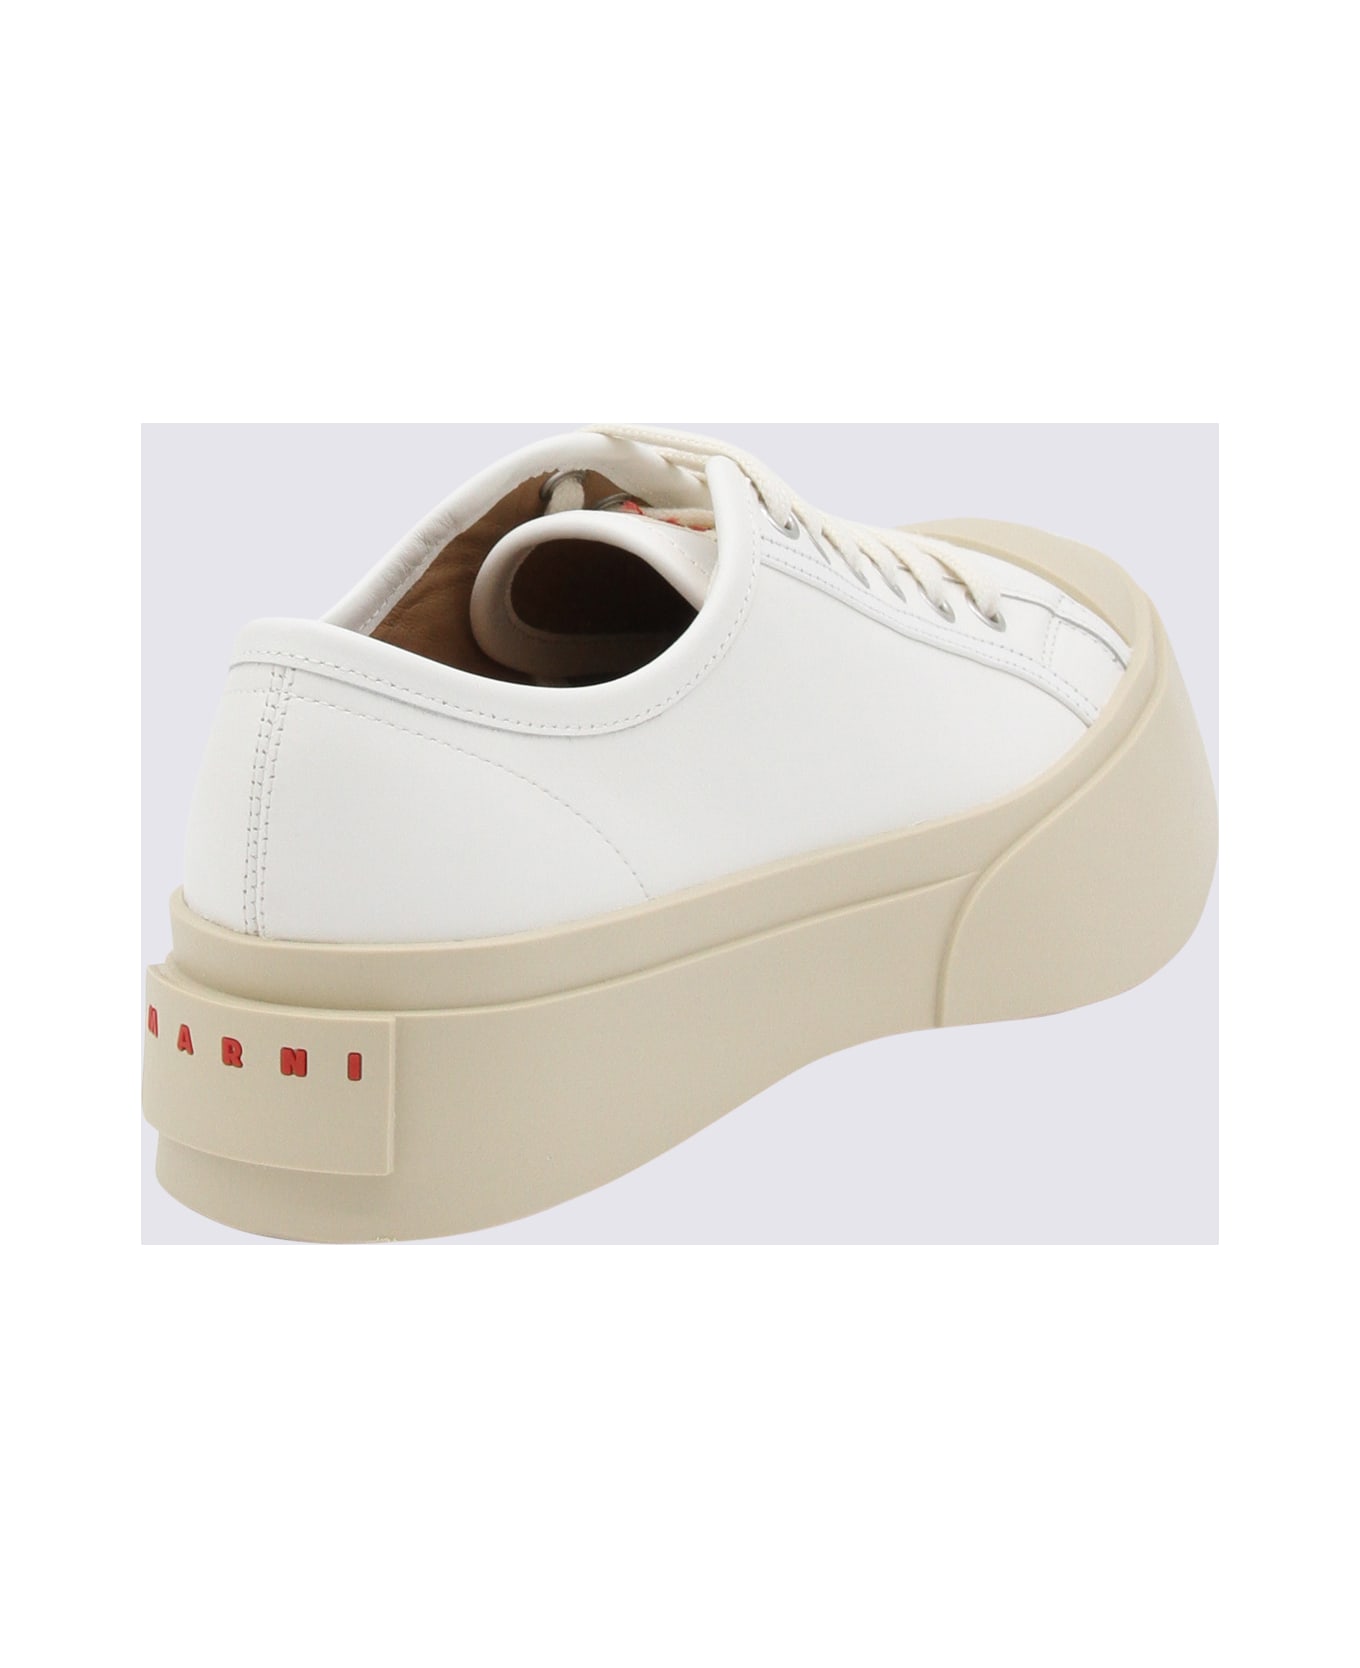 Marni White Leather Pablo Sneakers - Lily white